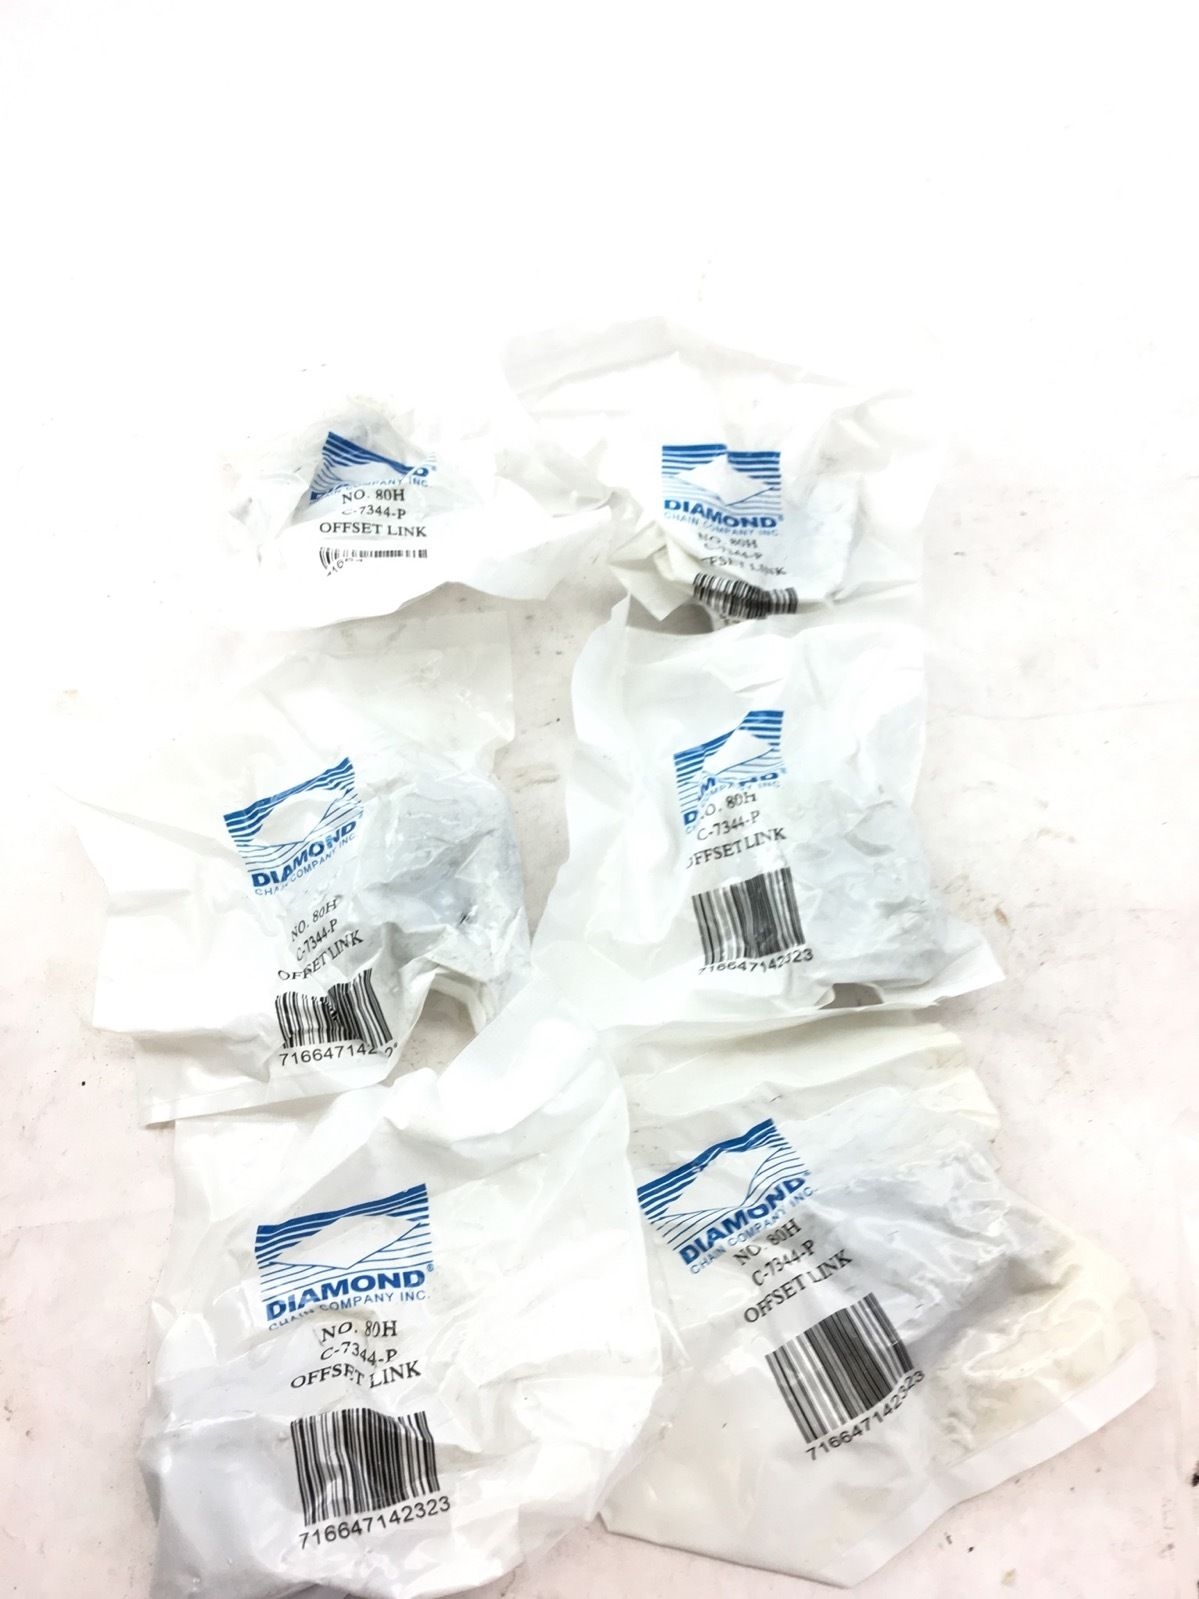 NEW IN BAG LOT OF 6 DIAMOND C-7344-P CHAIN LINK 80H OFFSET LINK, (A189) 1